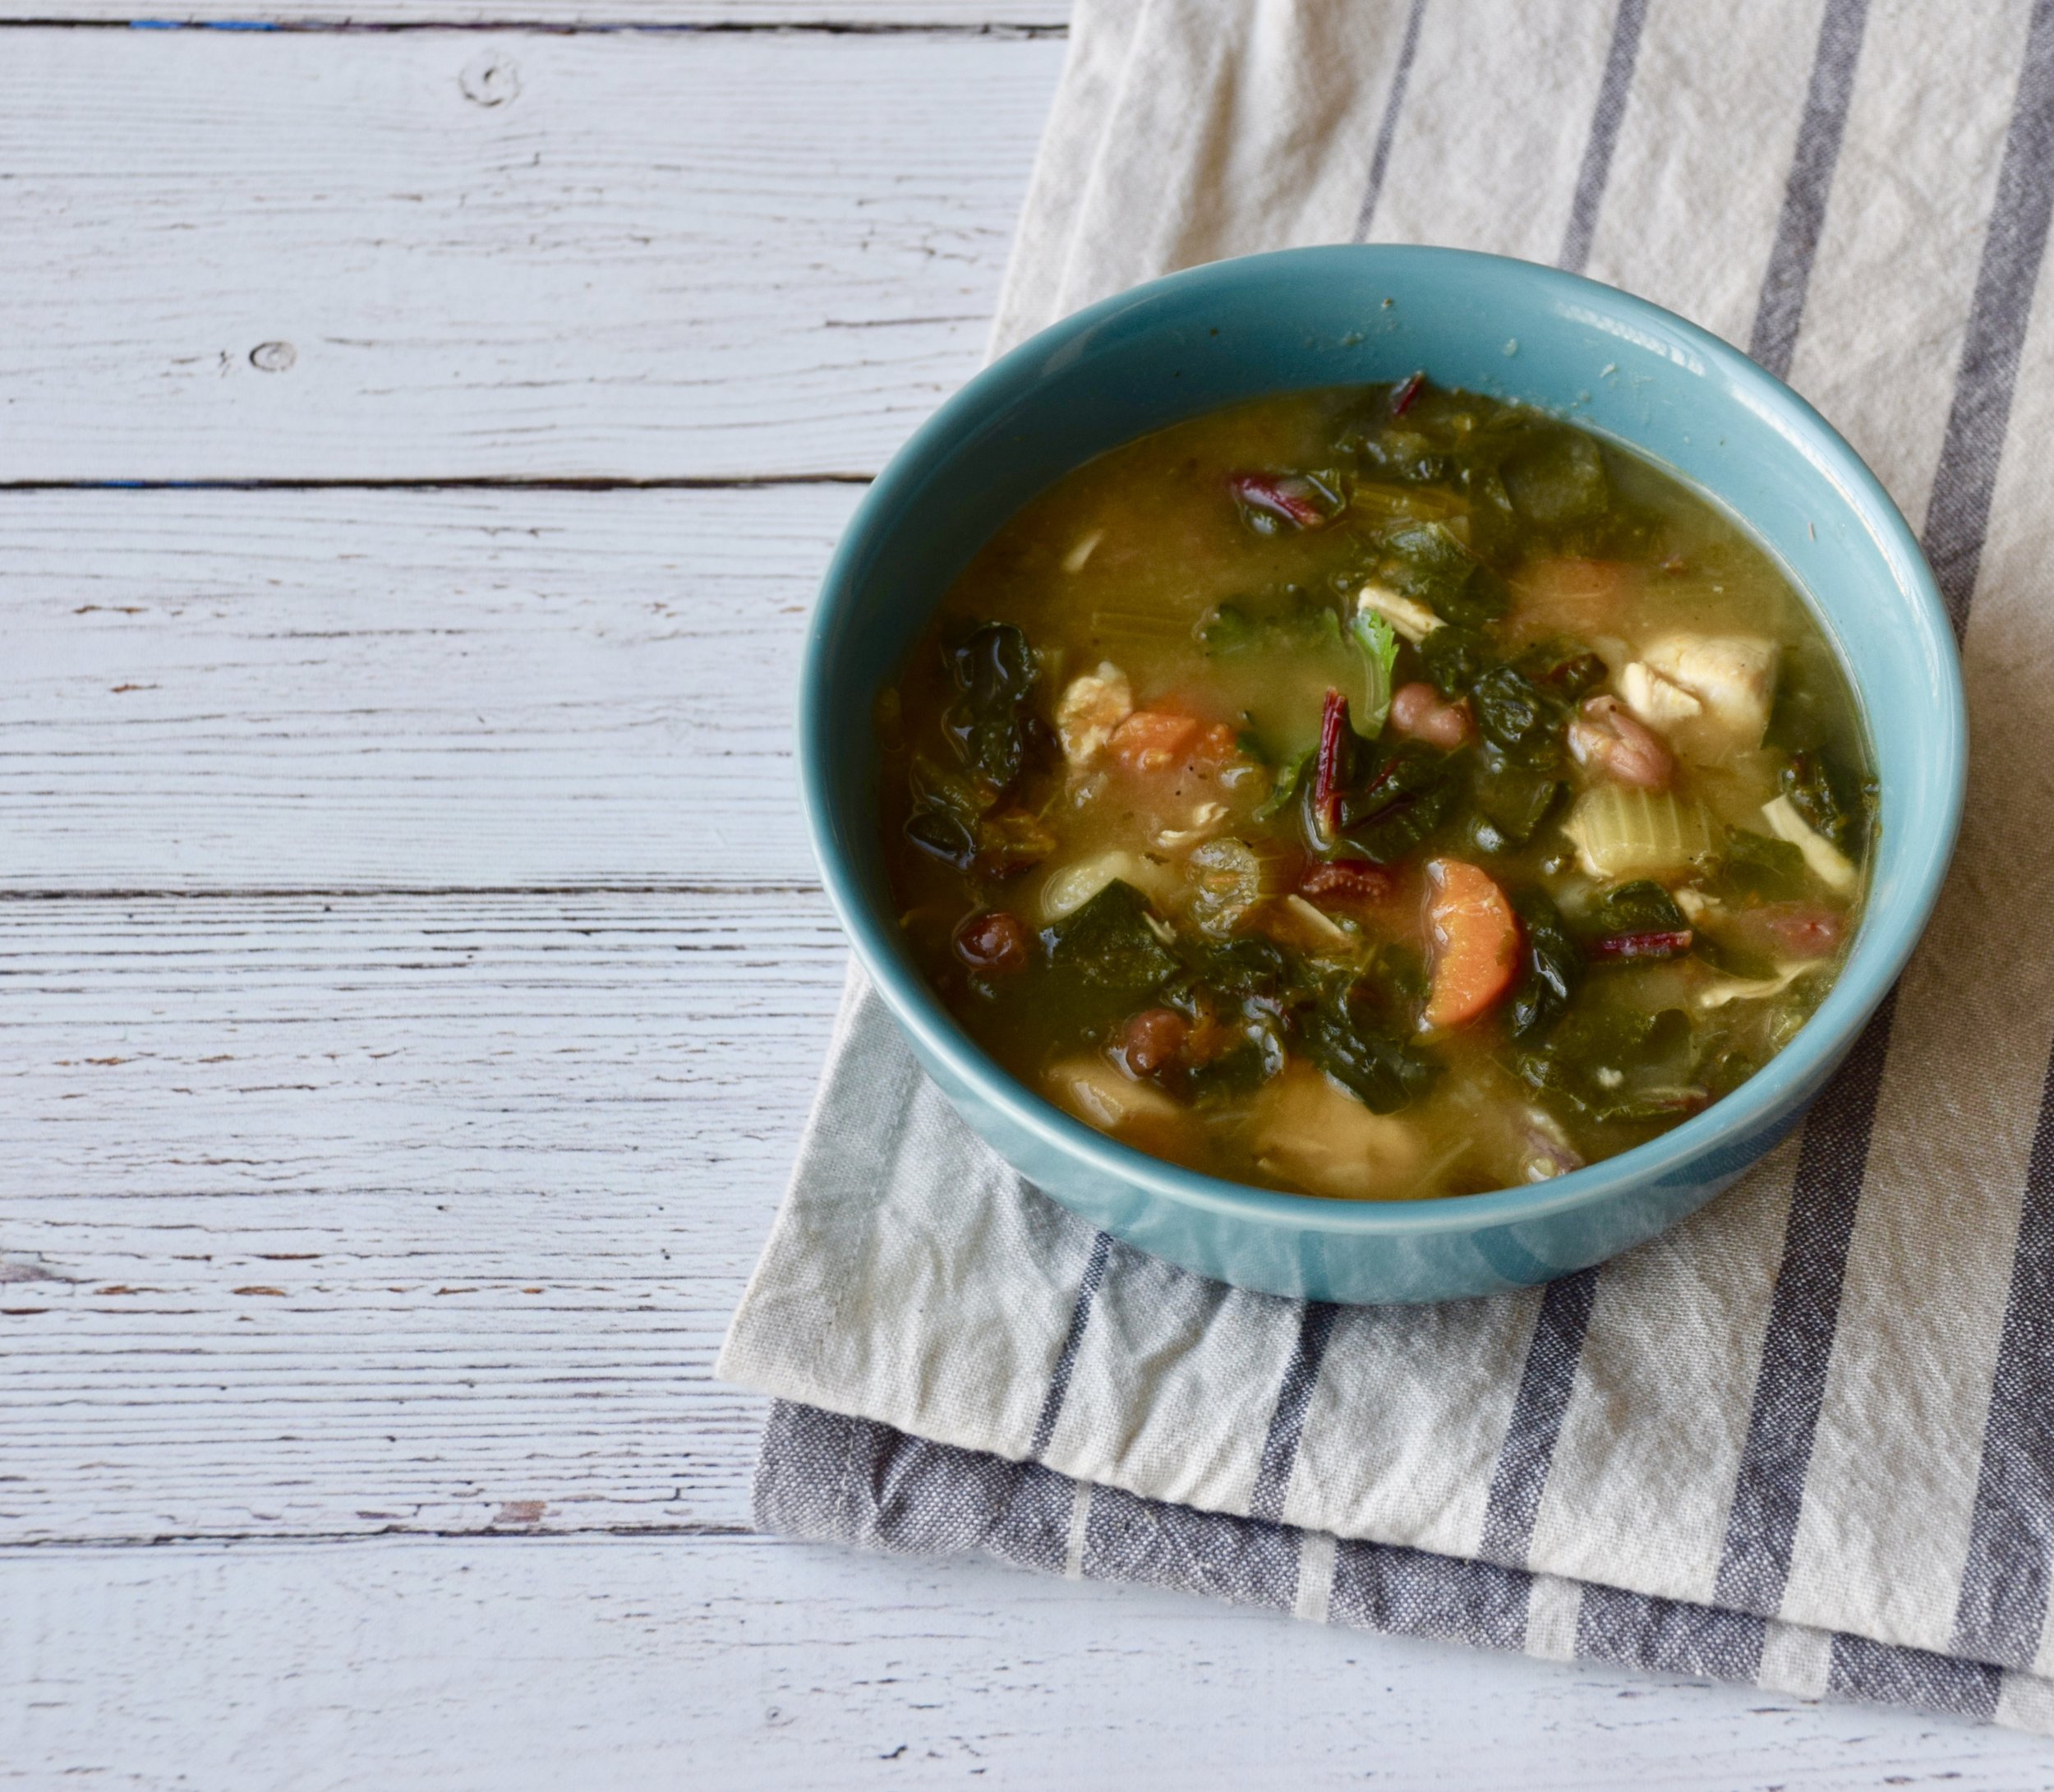 Wholesome Start Nutrition Counseling - Instant Pot Hearty Winter Soup